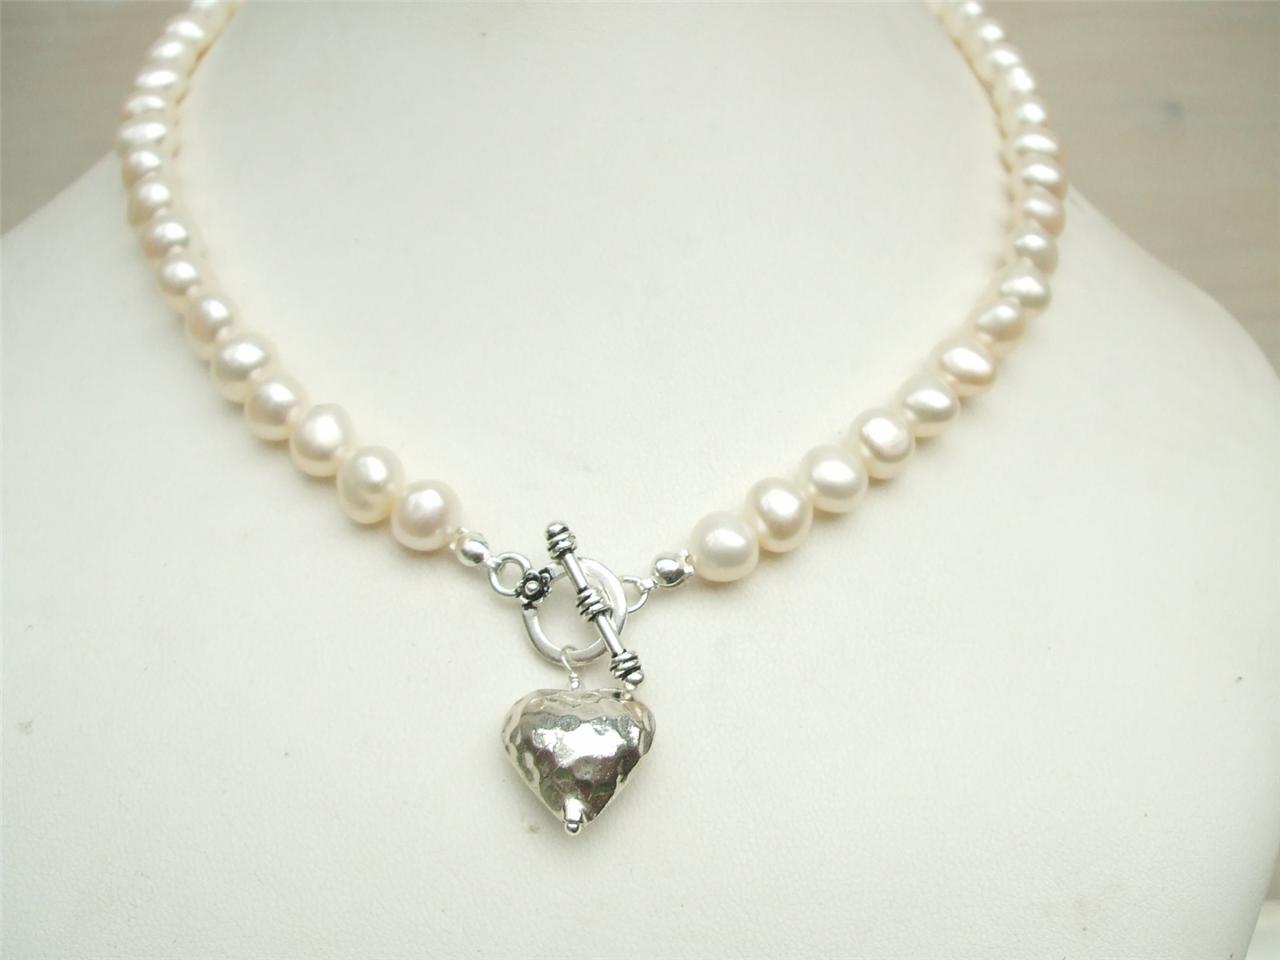 DESIGNER WHITE IVORY FRESHWATER PEARL NECKLACE 925 STERLING SILVER ...